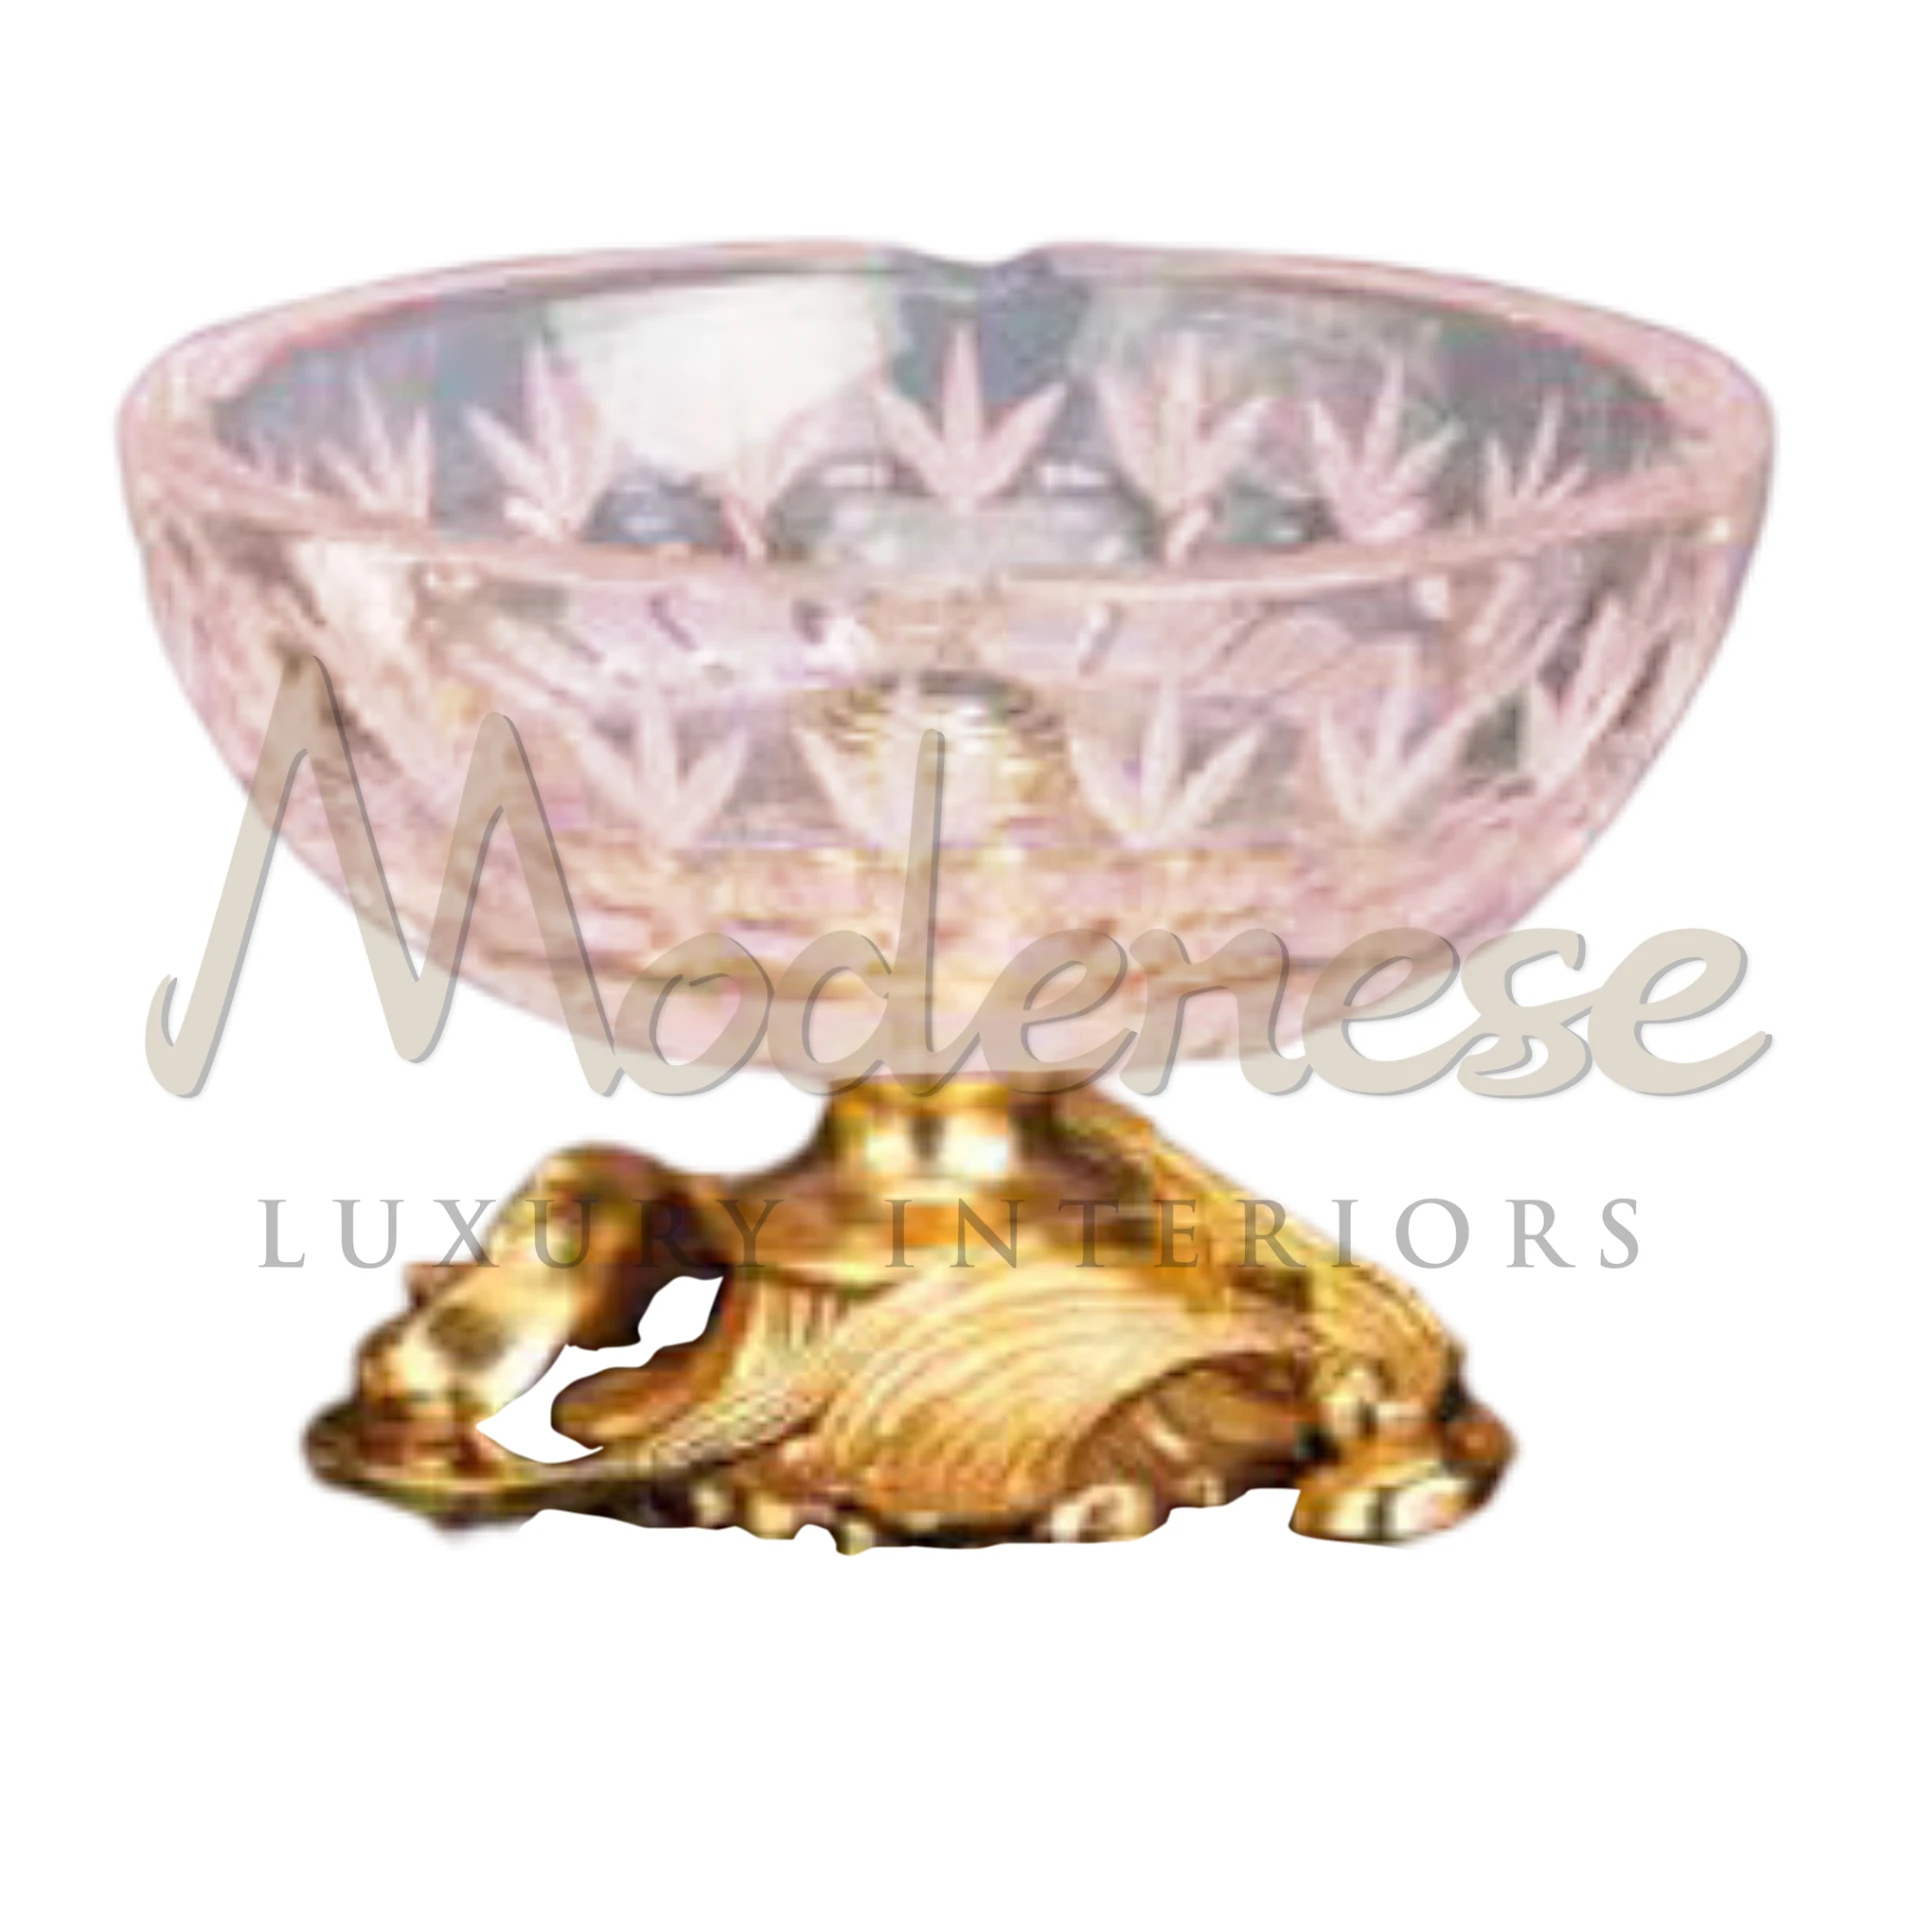 Gorgeous Pink Bowl, a stunning glass decorative piece, adds elegance and sophistication, perfect for enhancing luxury and classic interior designs.